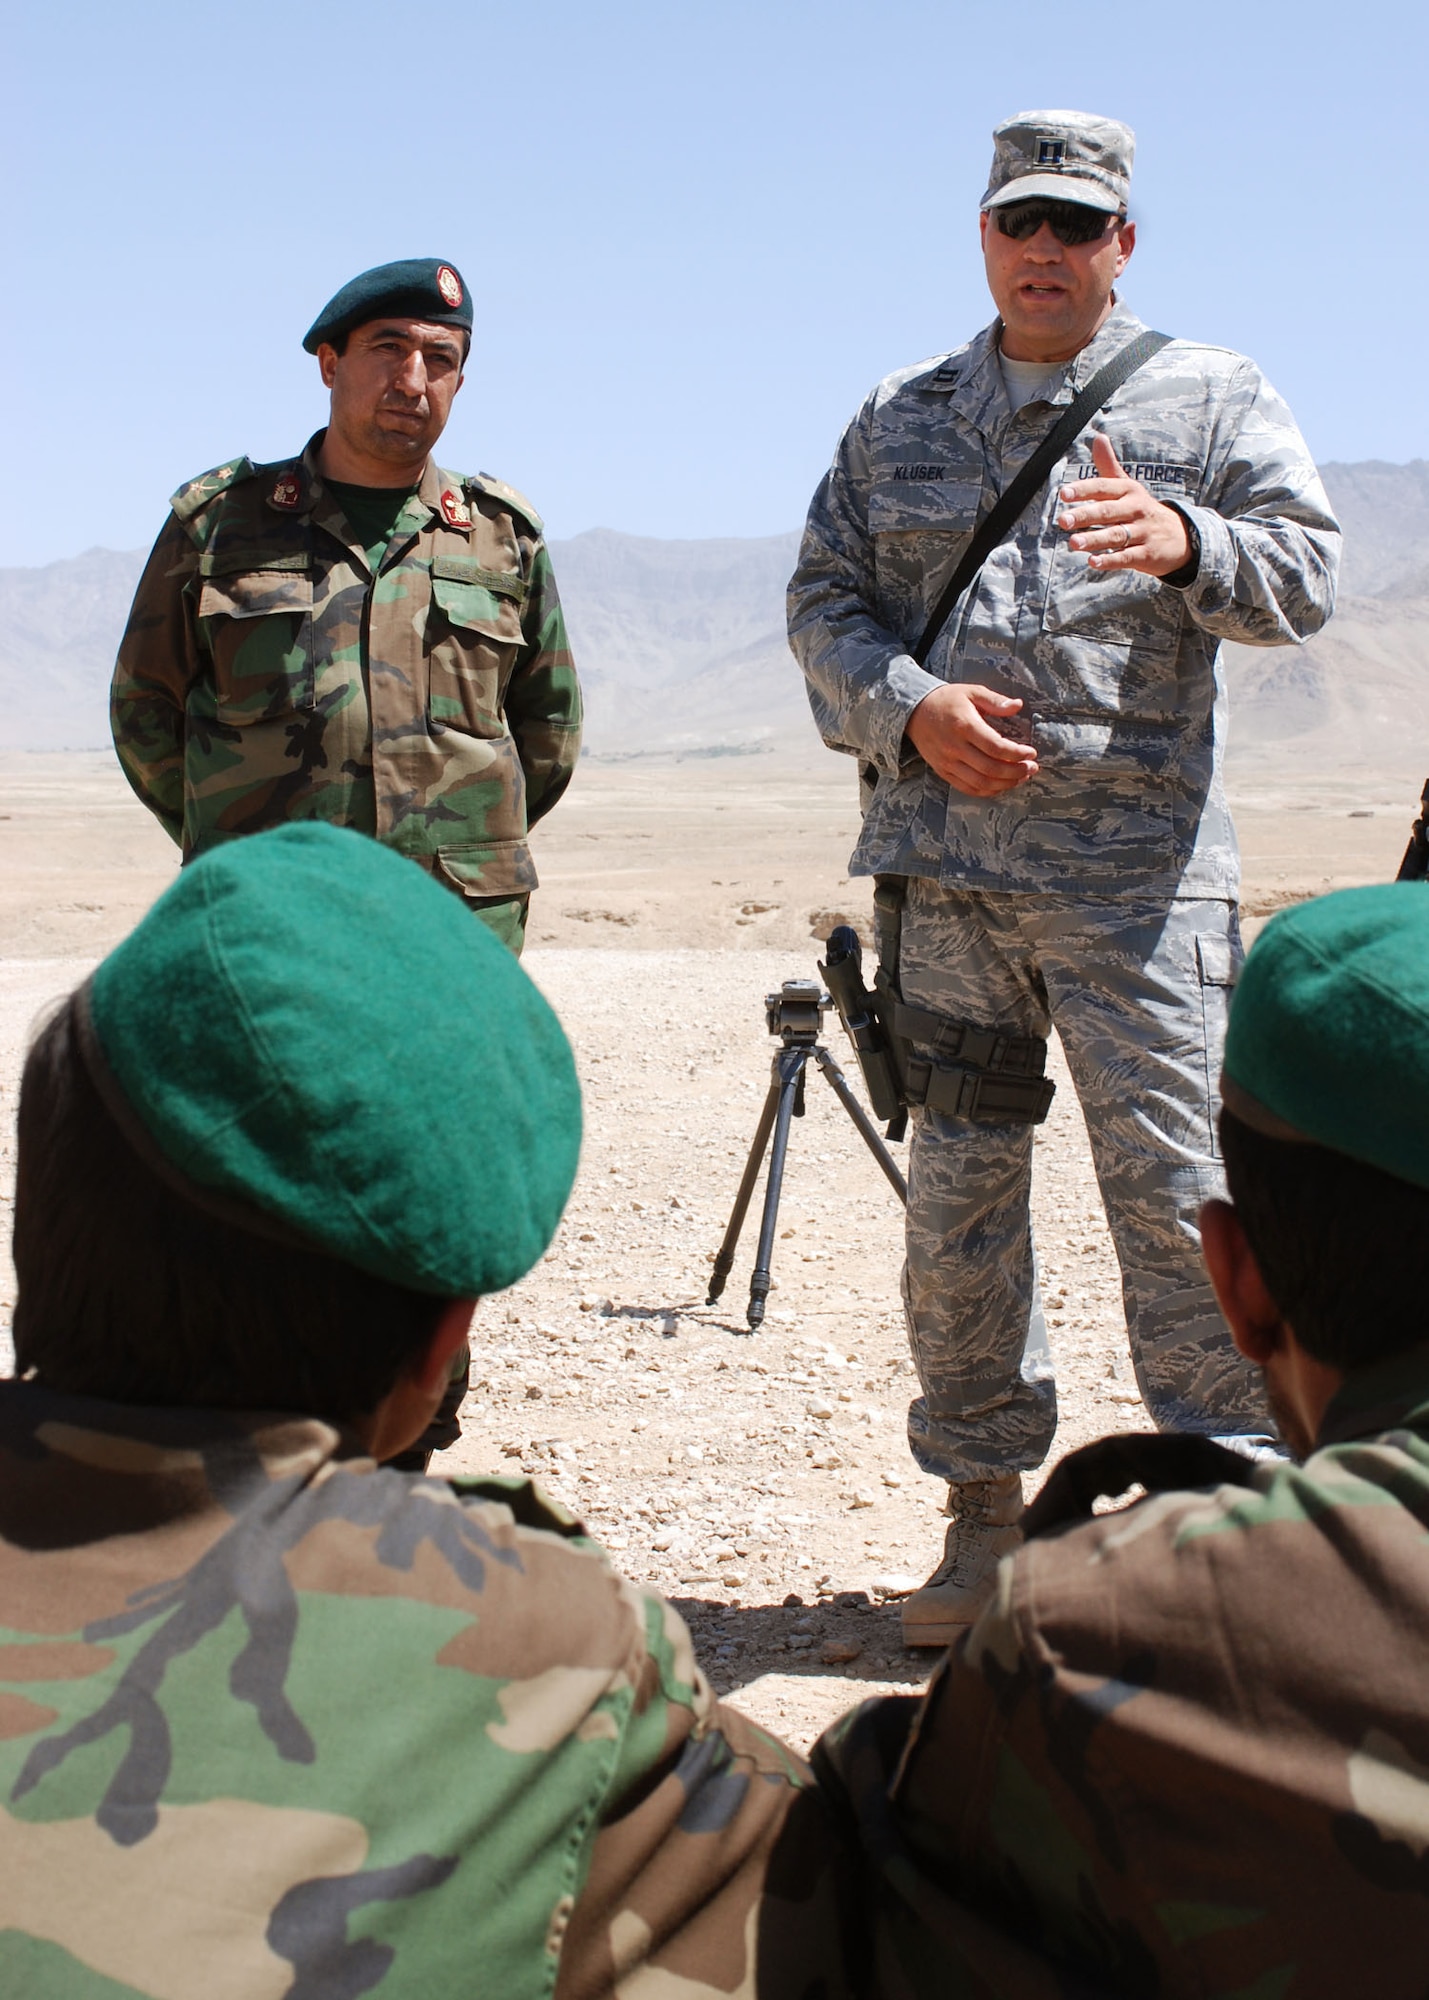 Capt. Todd Klusek explains a drivers' safety issue regarding Humvee rollovers to Afghan National Army soldiers during Humvee training at the Kabul Military Training Center in Kabul, Afghanistan. Captain Klusek serves as a combat service support senior mentor for the center's Humvee Driving course. Captain Klusek is deployed from of Dyess Air Force Base, Texas. (U.S. Navy photo/Petty Officer 1st Class Douglas)
